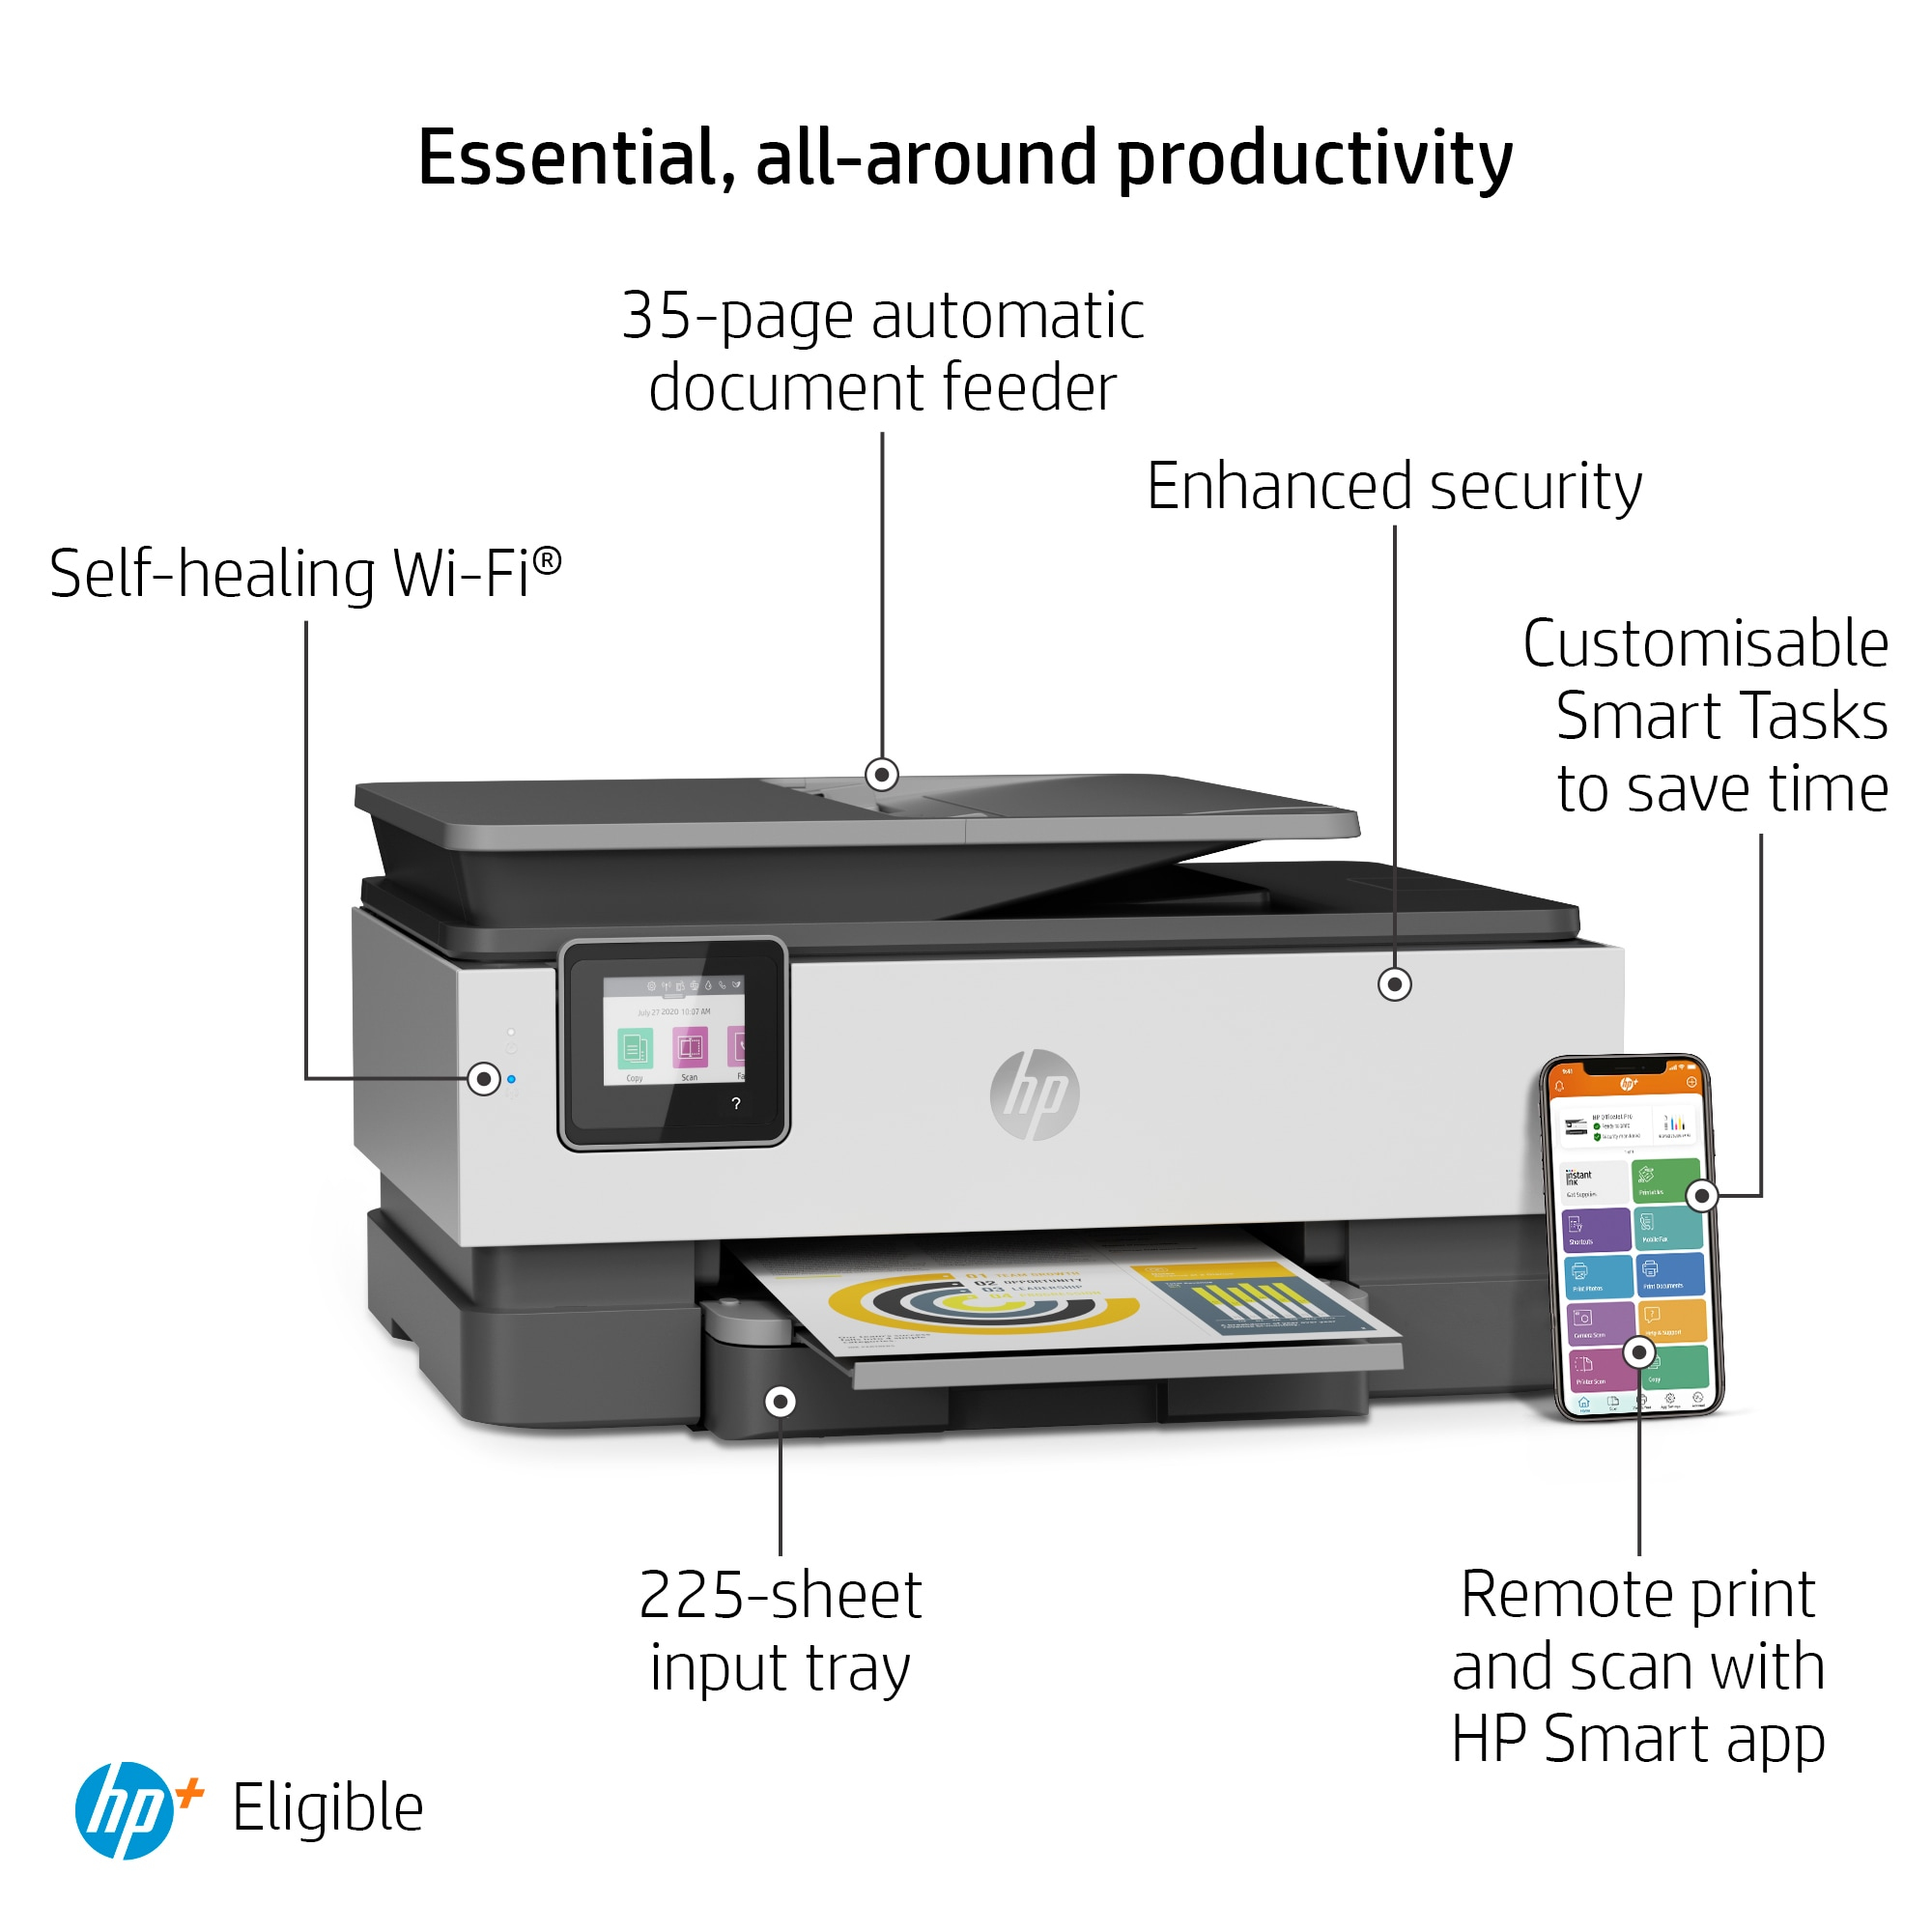 HP OfficeJet Pro HP 8024e All-in-One Printer, Home, Print, copy, scan, fax, HP+; HP Instant Ink eligible; Automatic document feeder; Two-sided printing